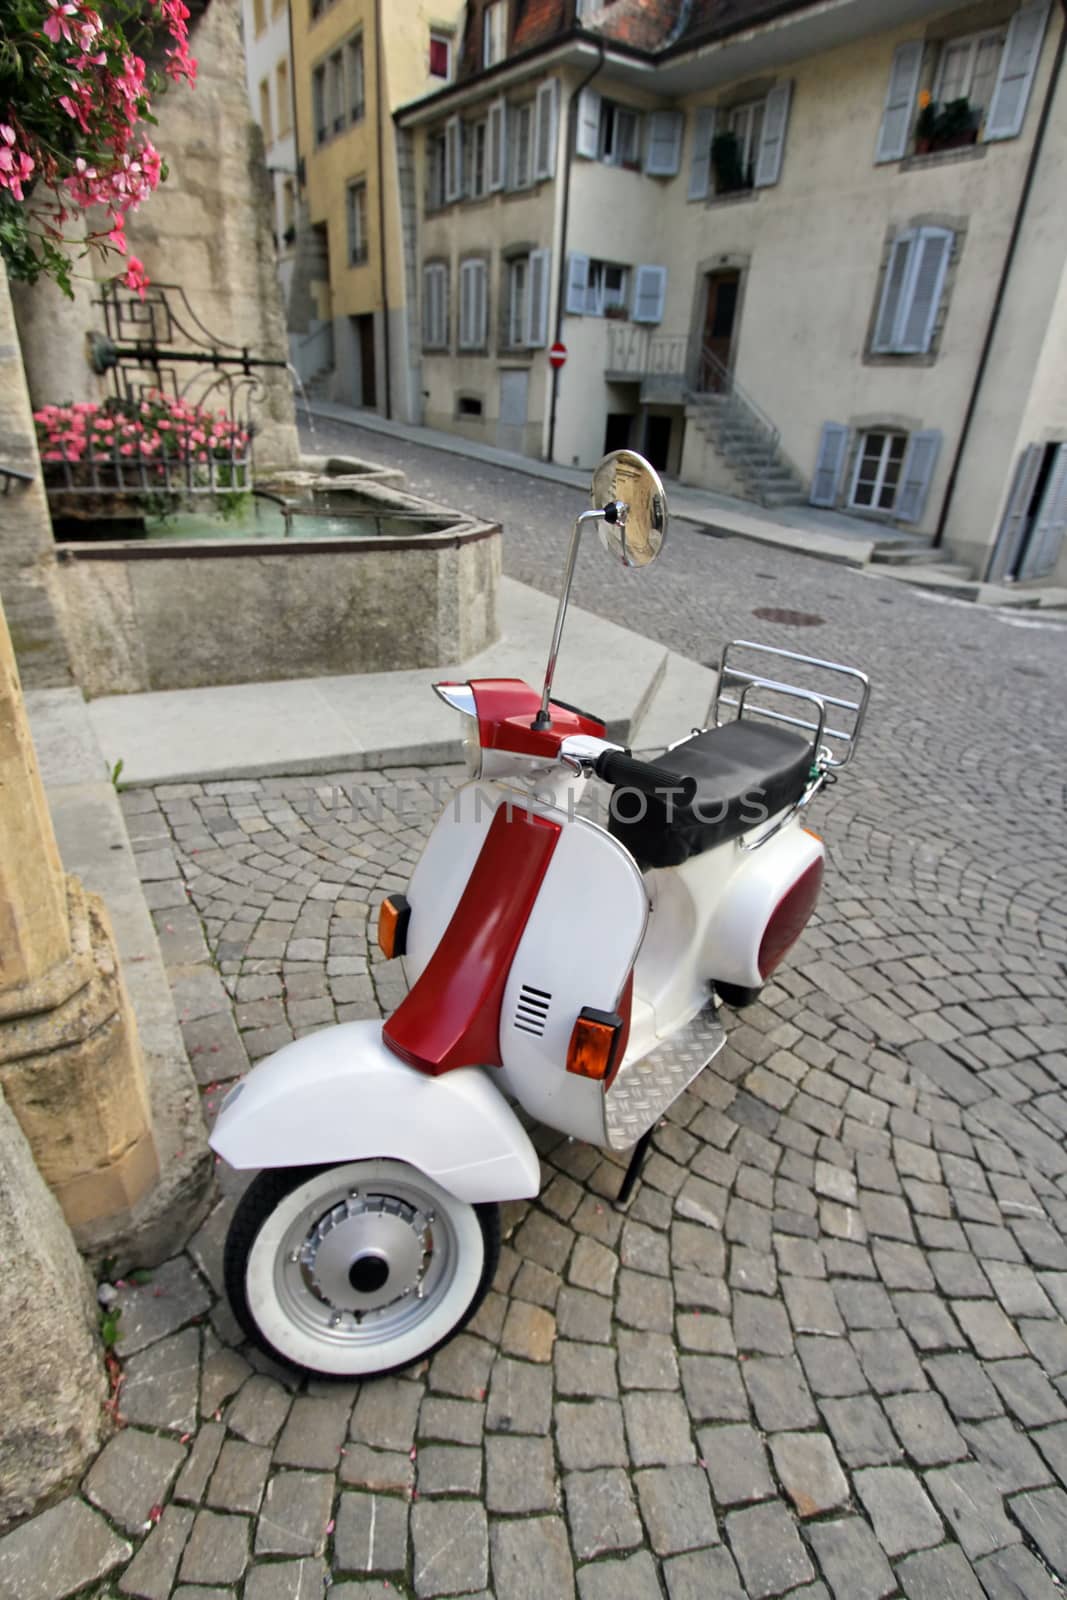 Scooter in old city, Estavayer-le-lac, Switzerland by Elenaphotos21